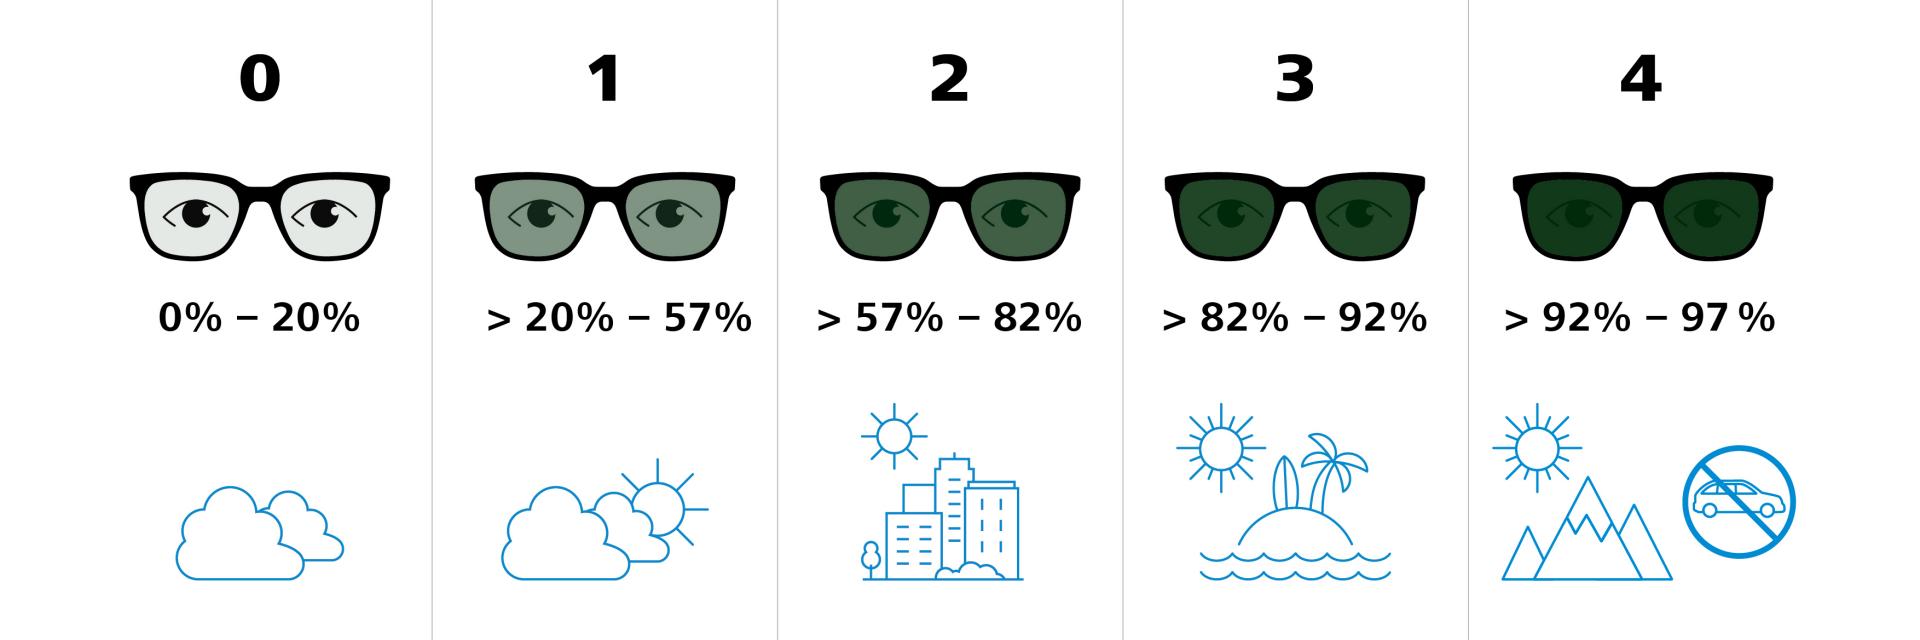 Graphic showing different categories of sunglass lenses. Different lens tints absorbe different percentages of light.